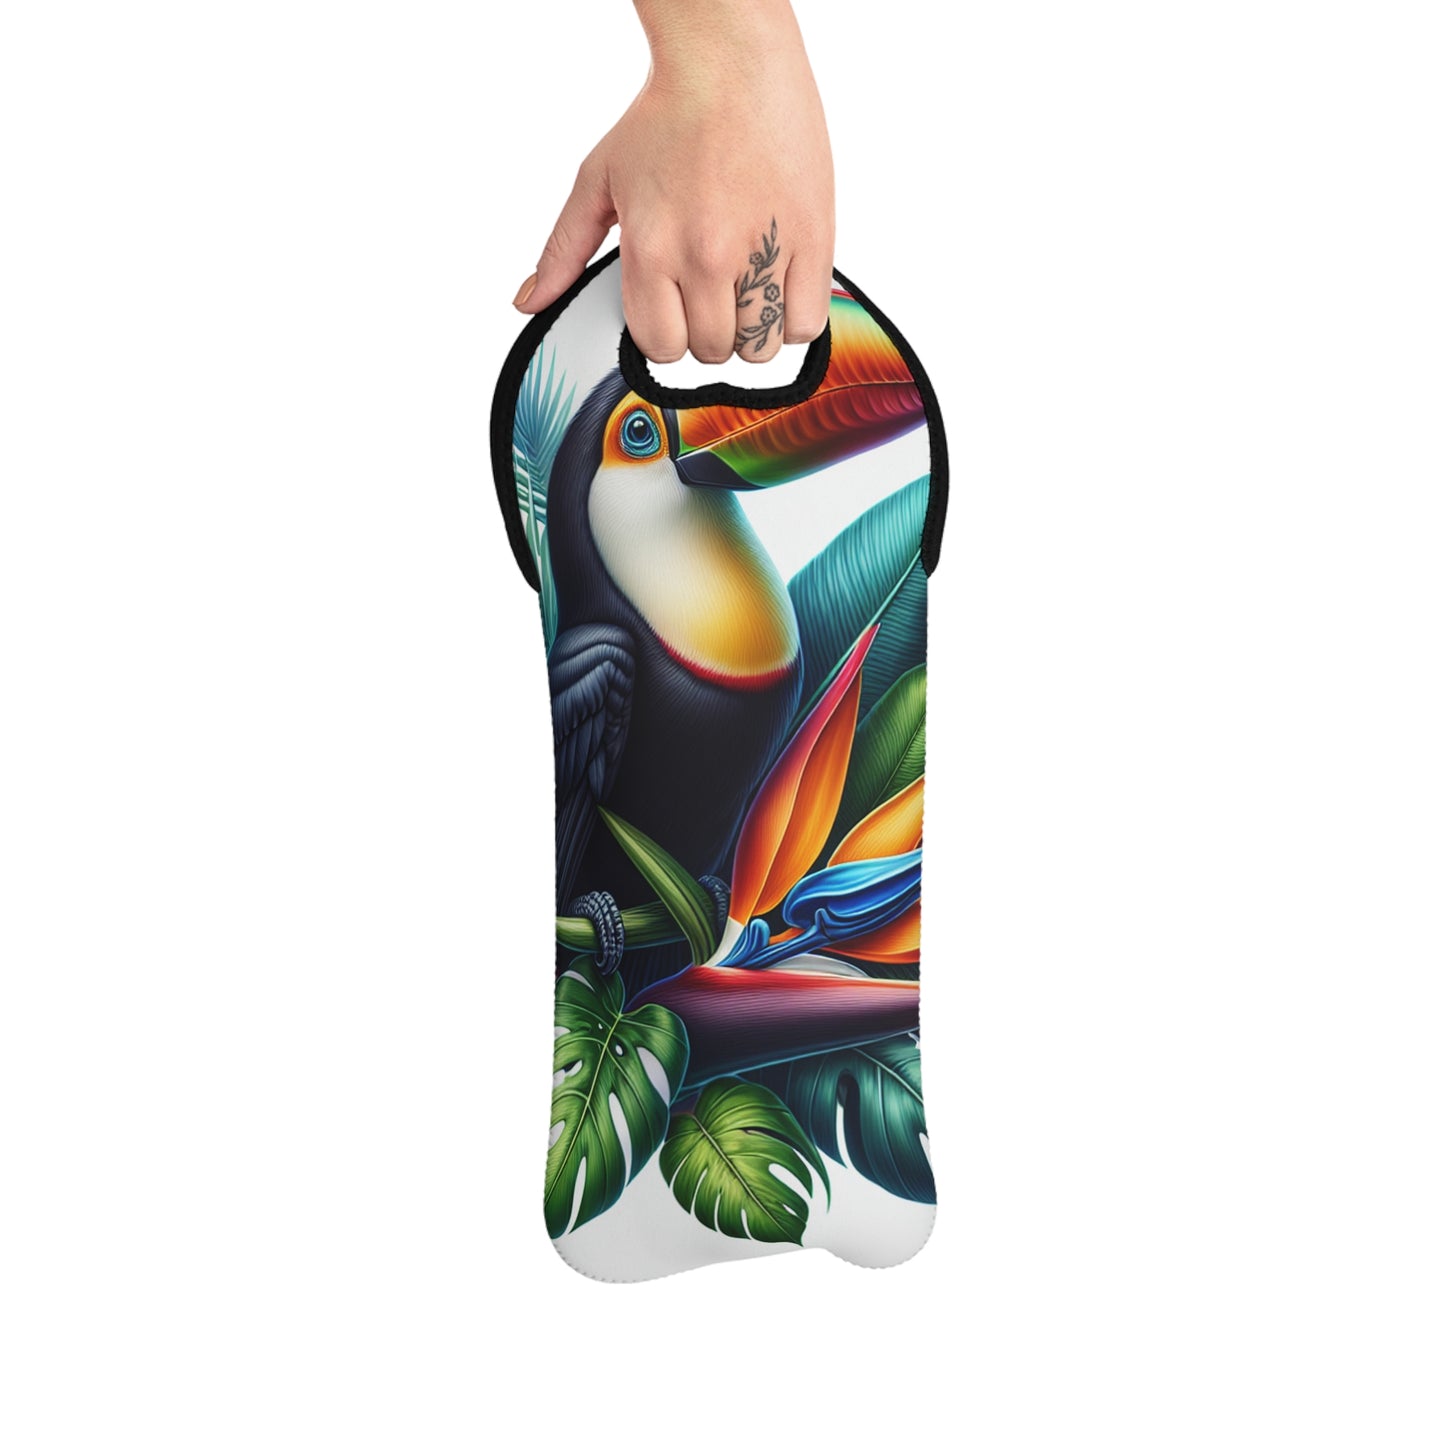 "Toucan on a Tropical Bloom" - The Alien Wine Tote Bag Hyperrealism Style